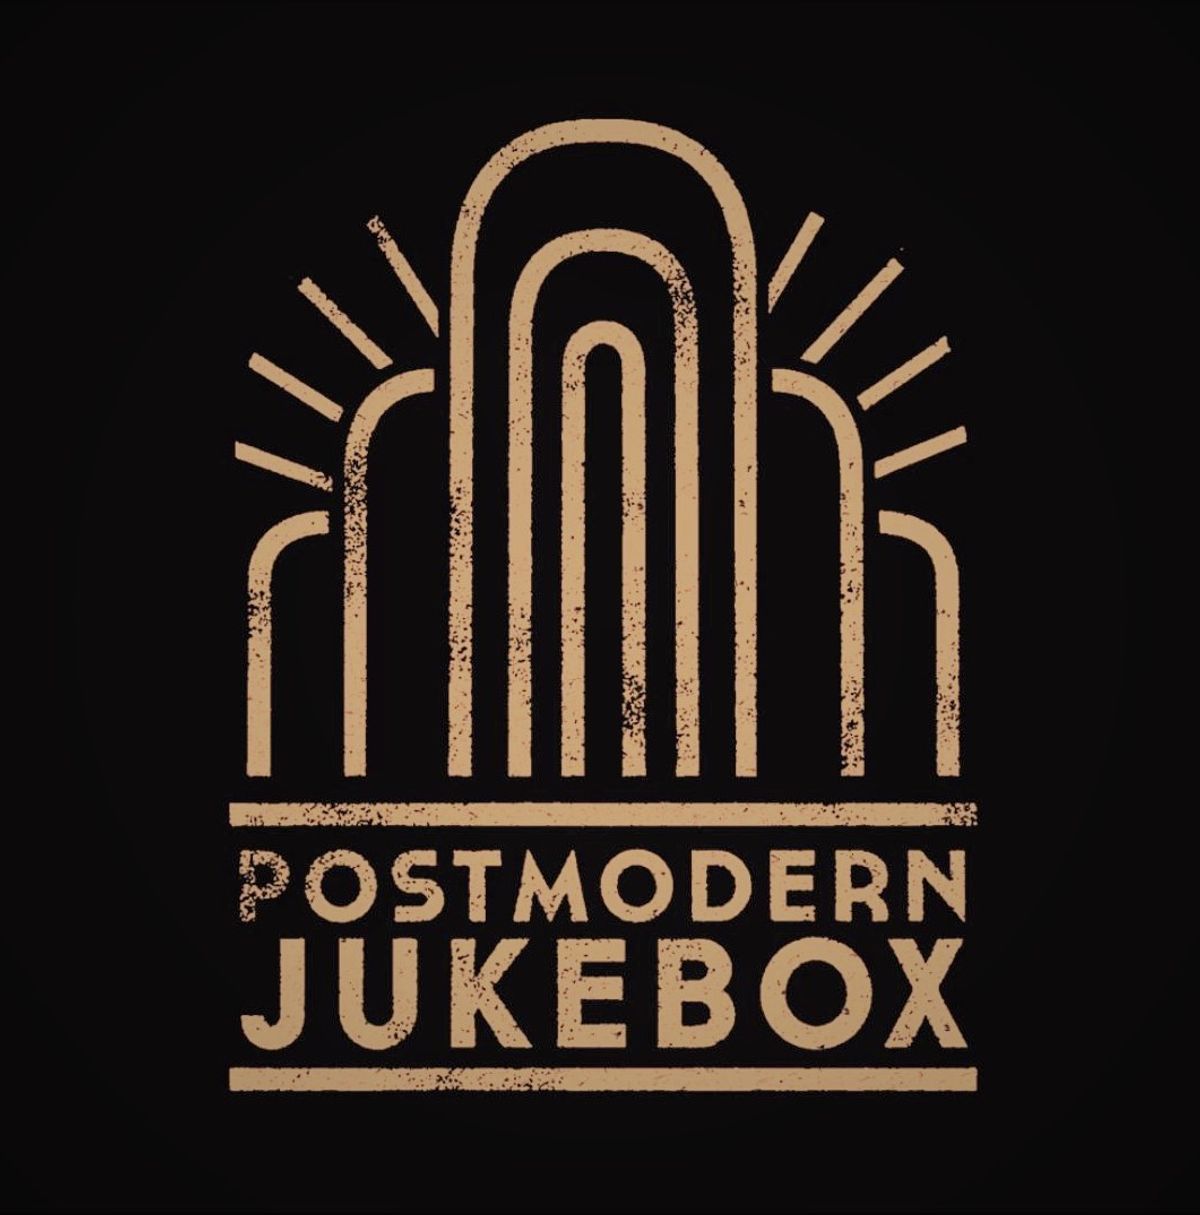 Why You Should Listen to Postmodern Jukebox